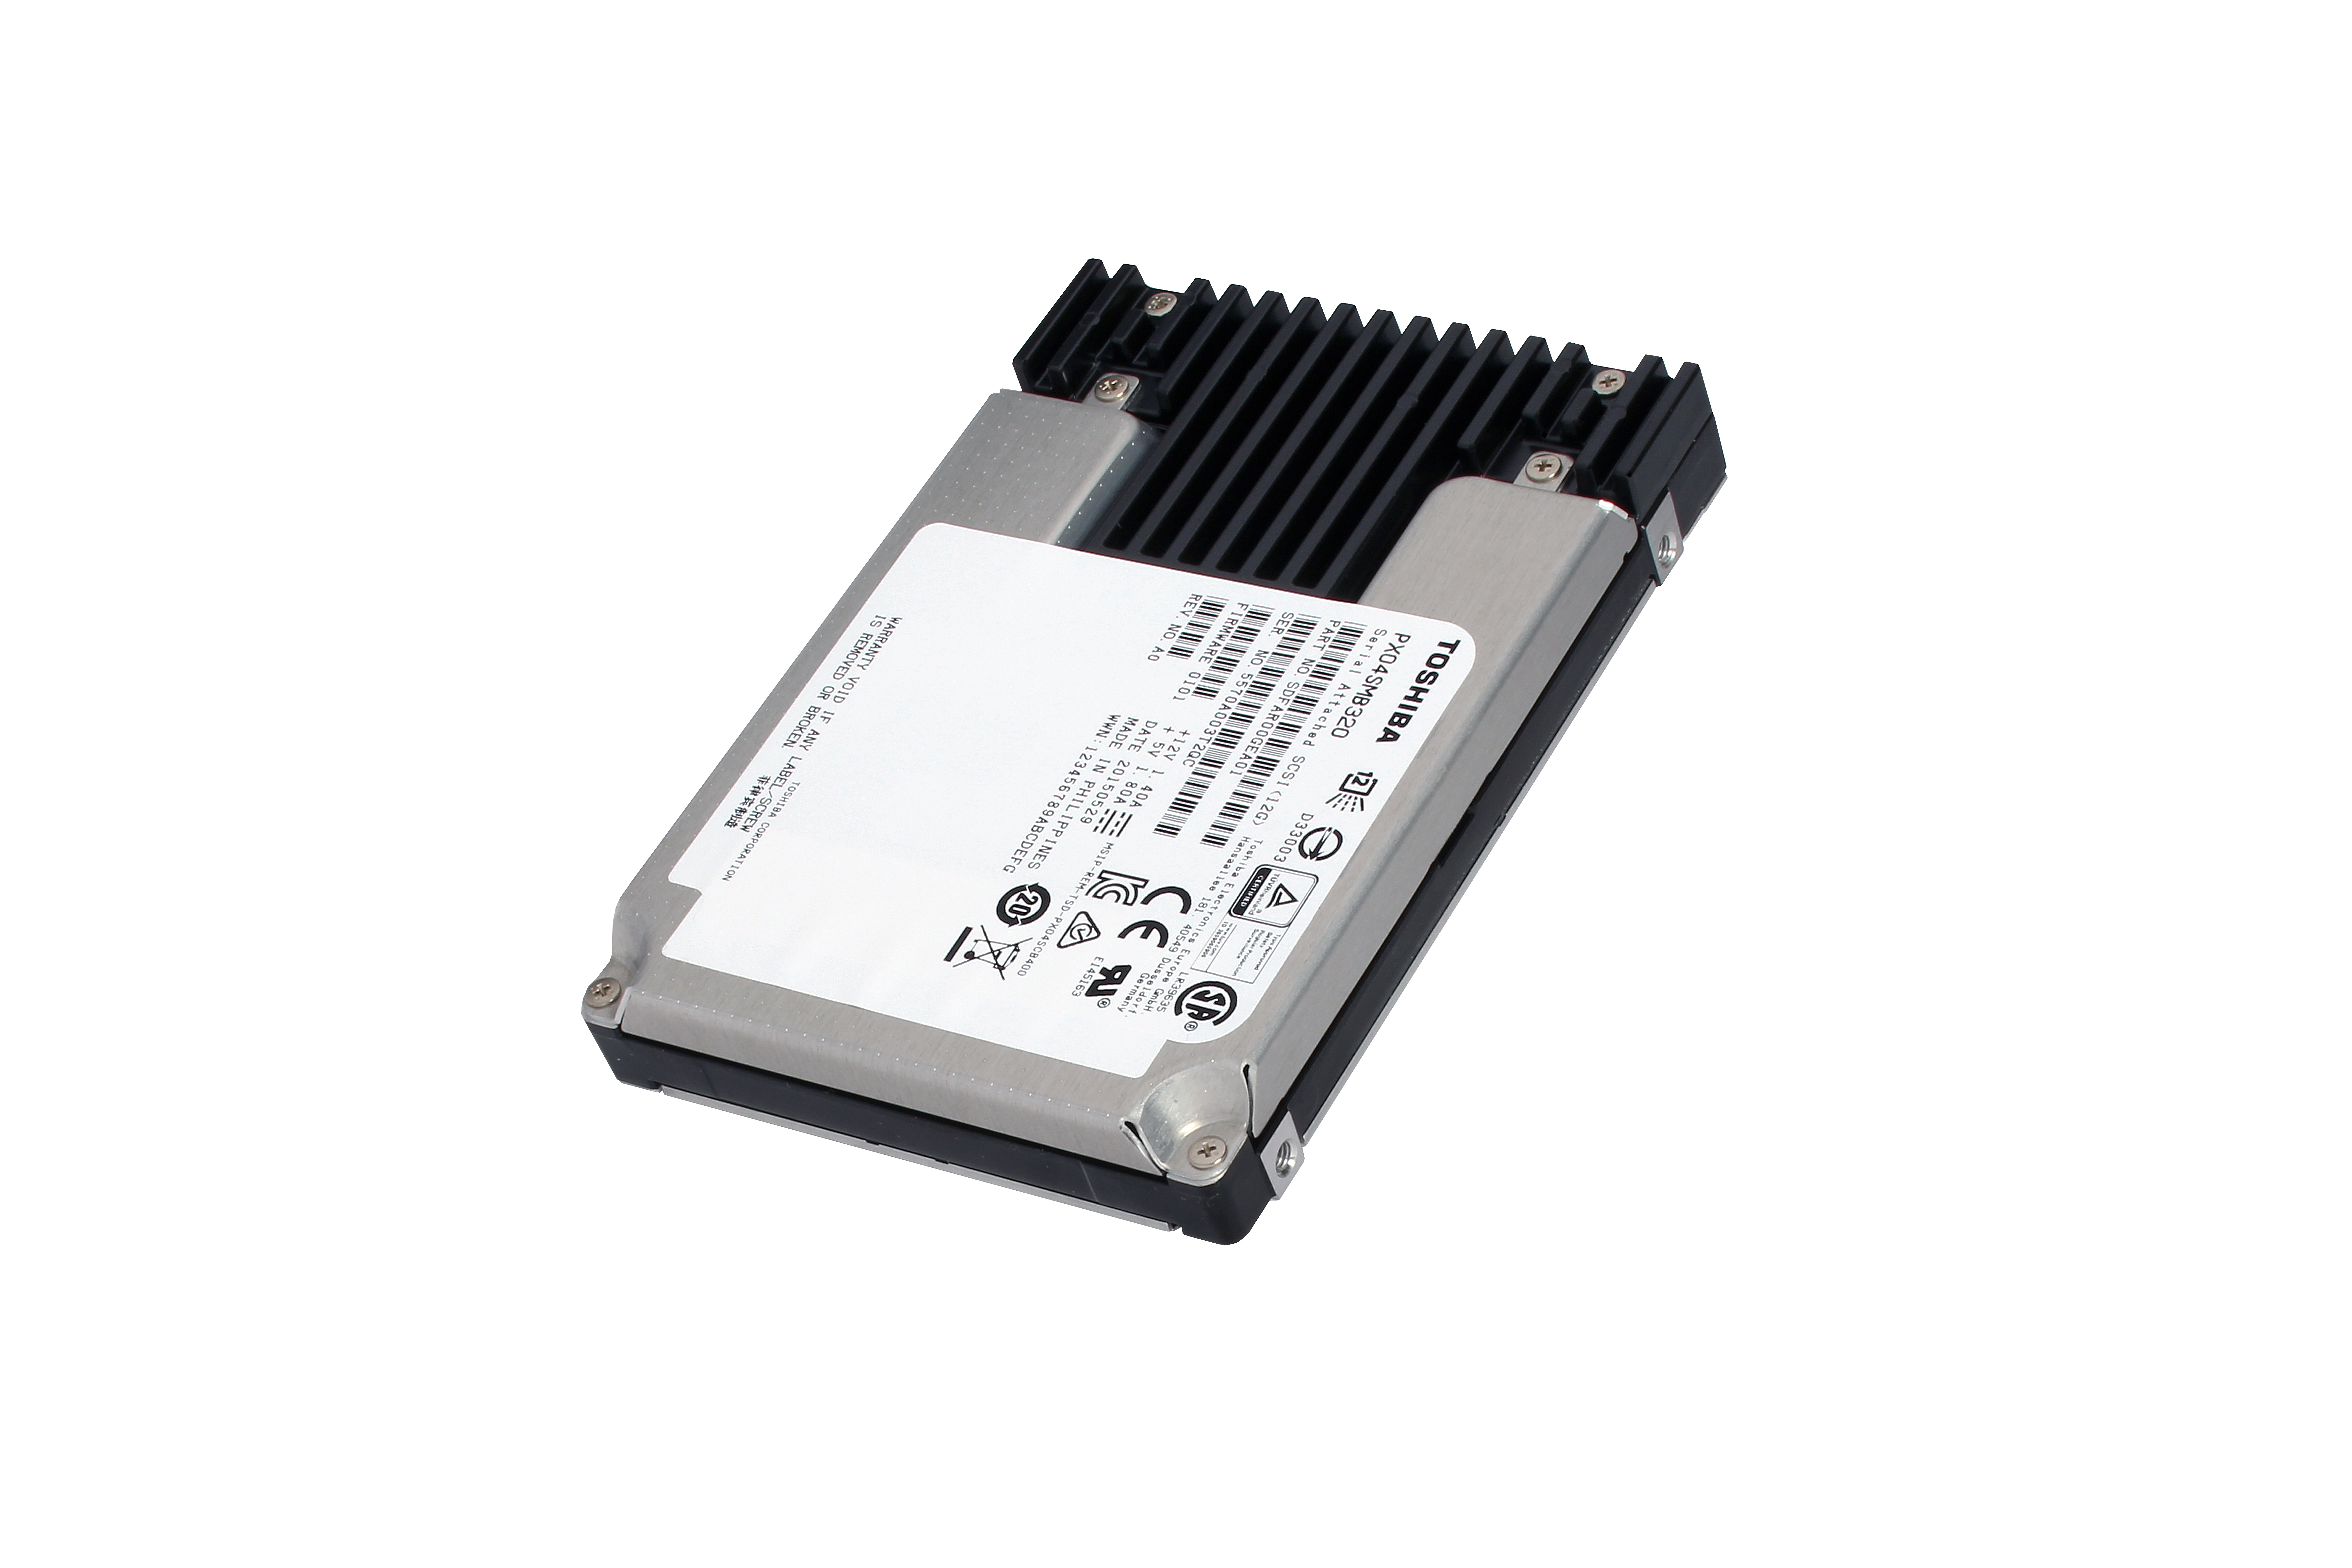 Toshiba Announces Third of Enterprise SSDs | Business Wire